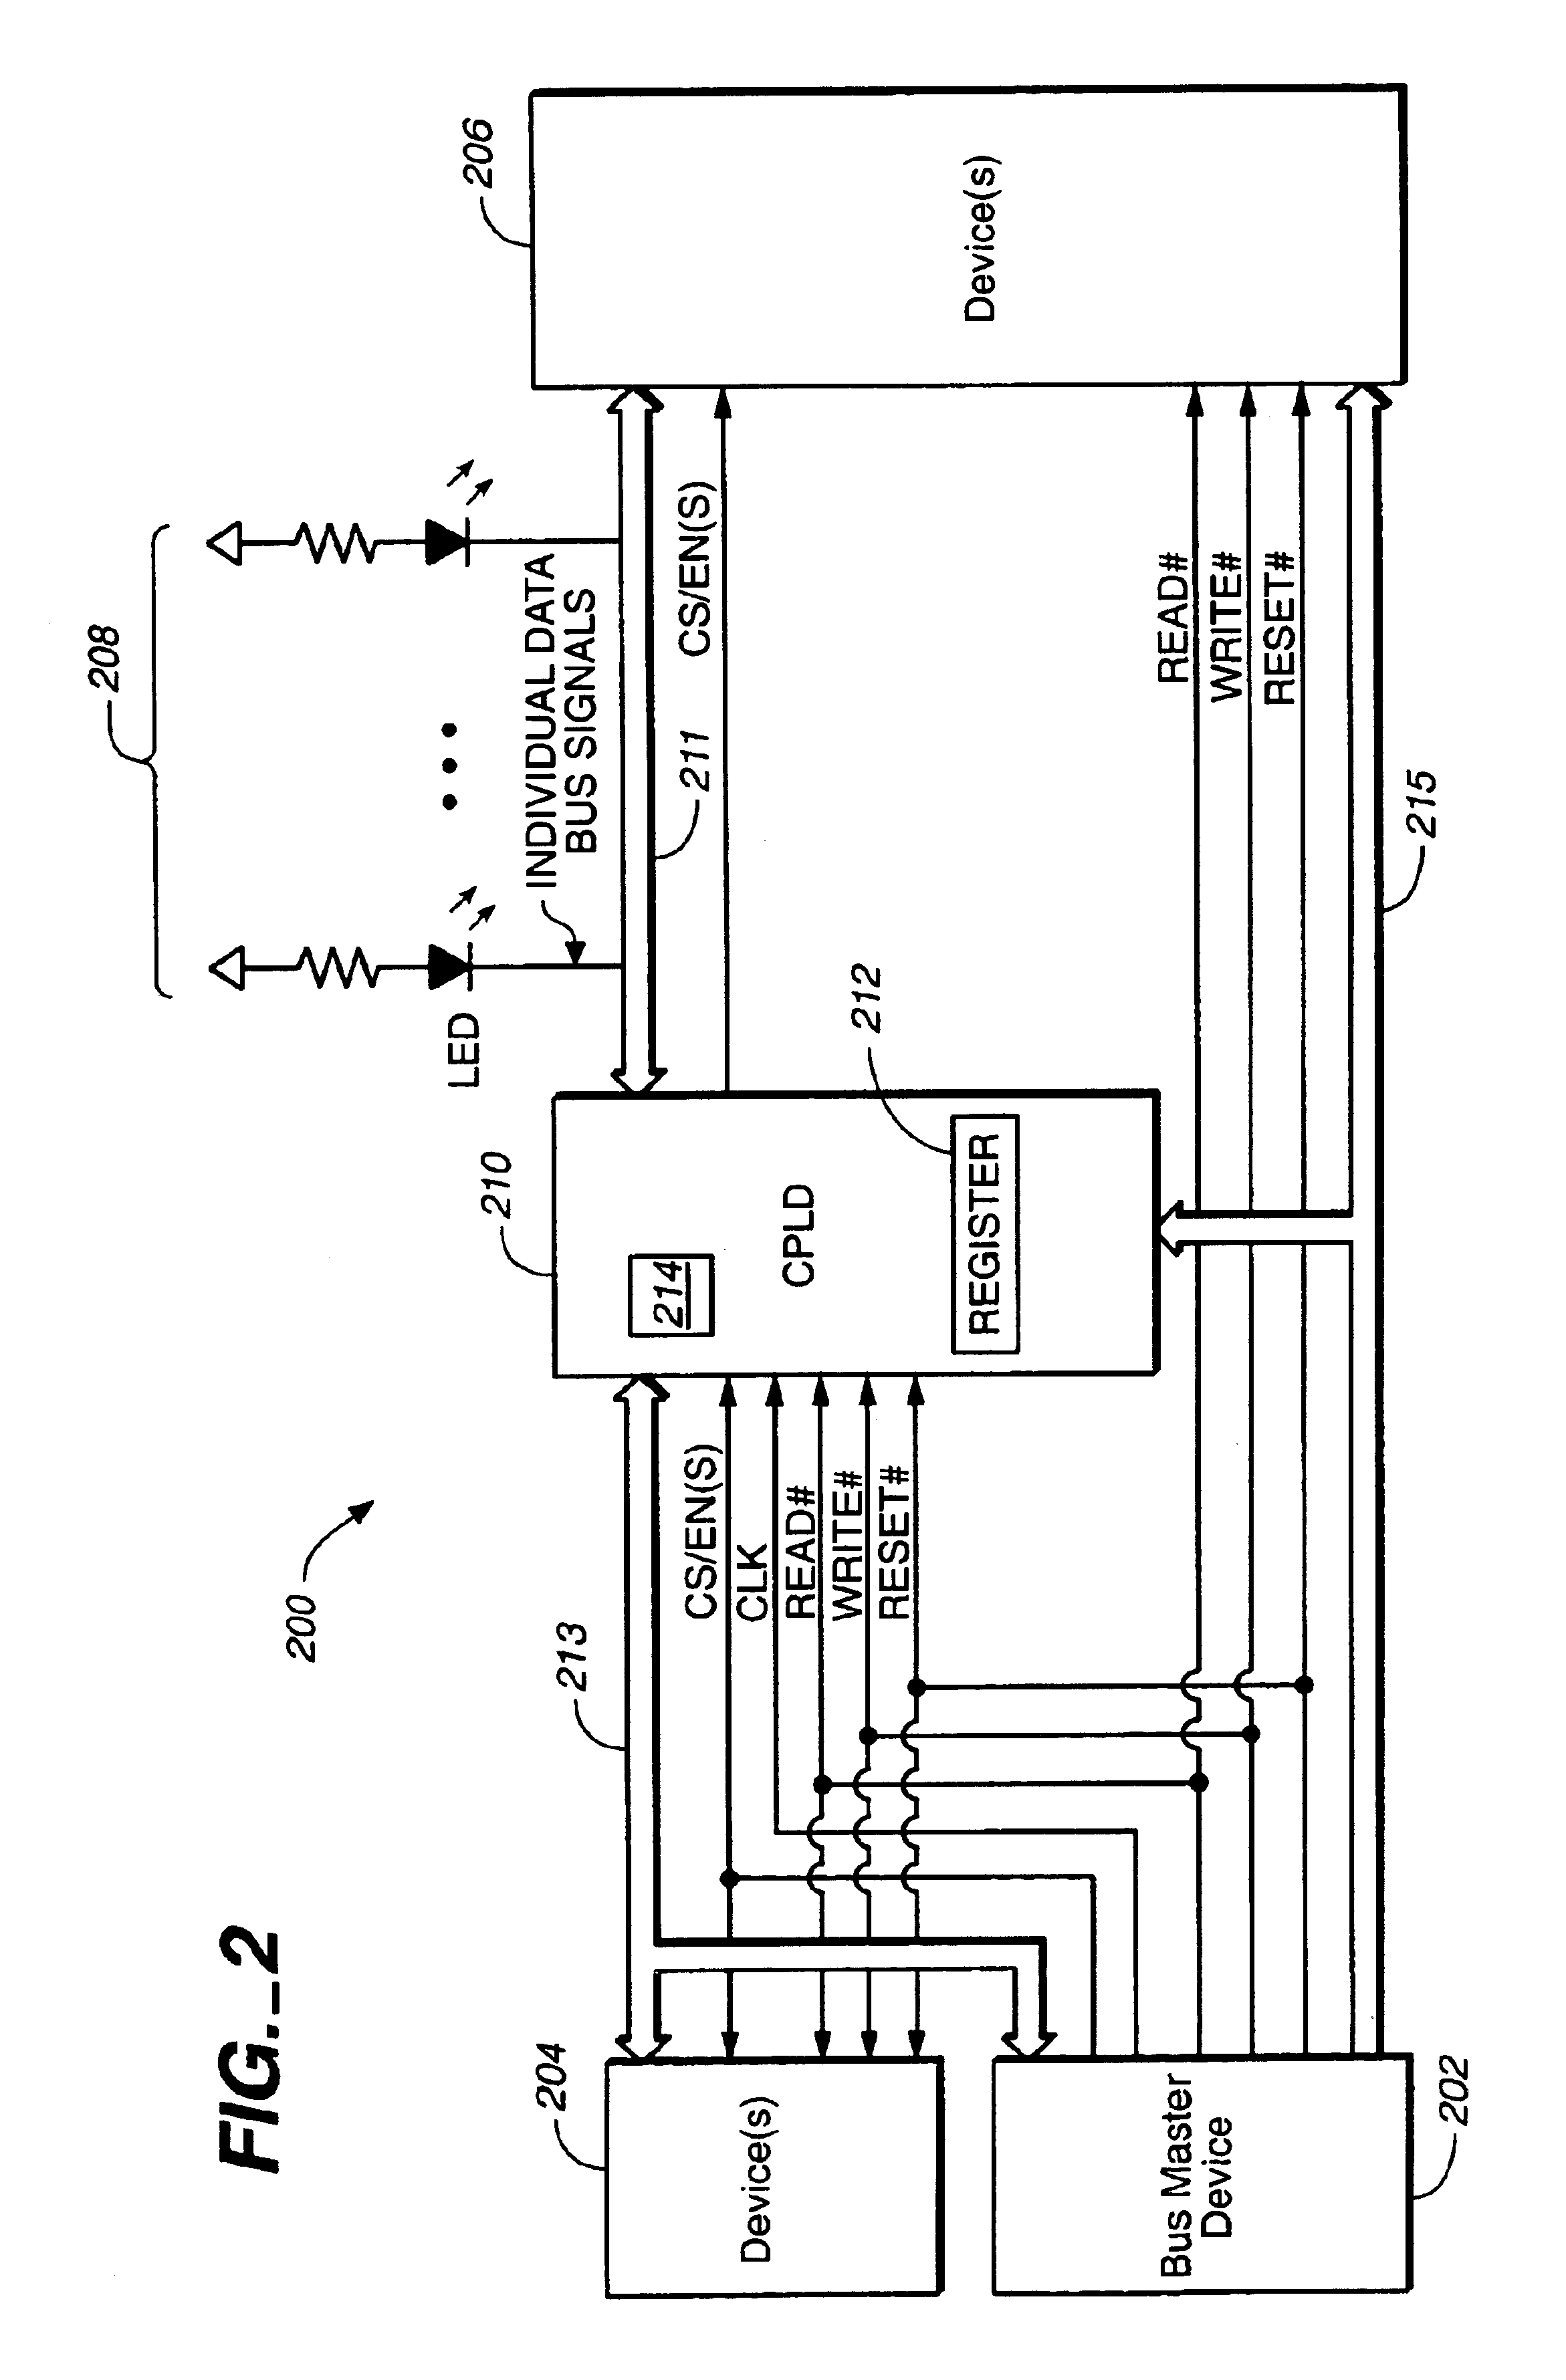 Method and apparatus for transferring data between data buses